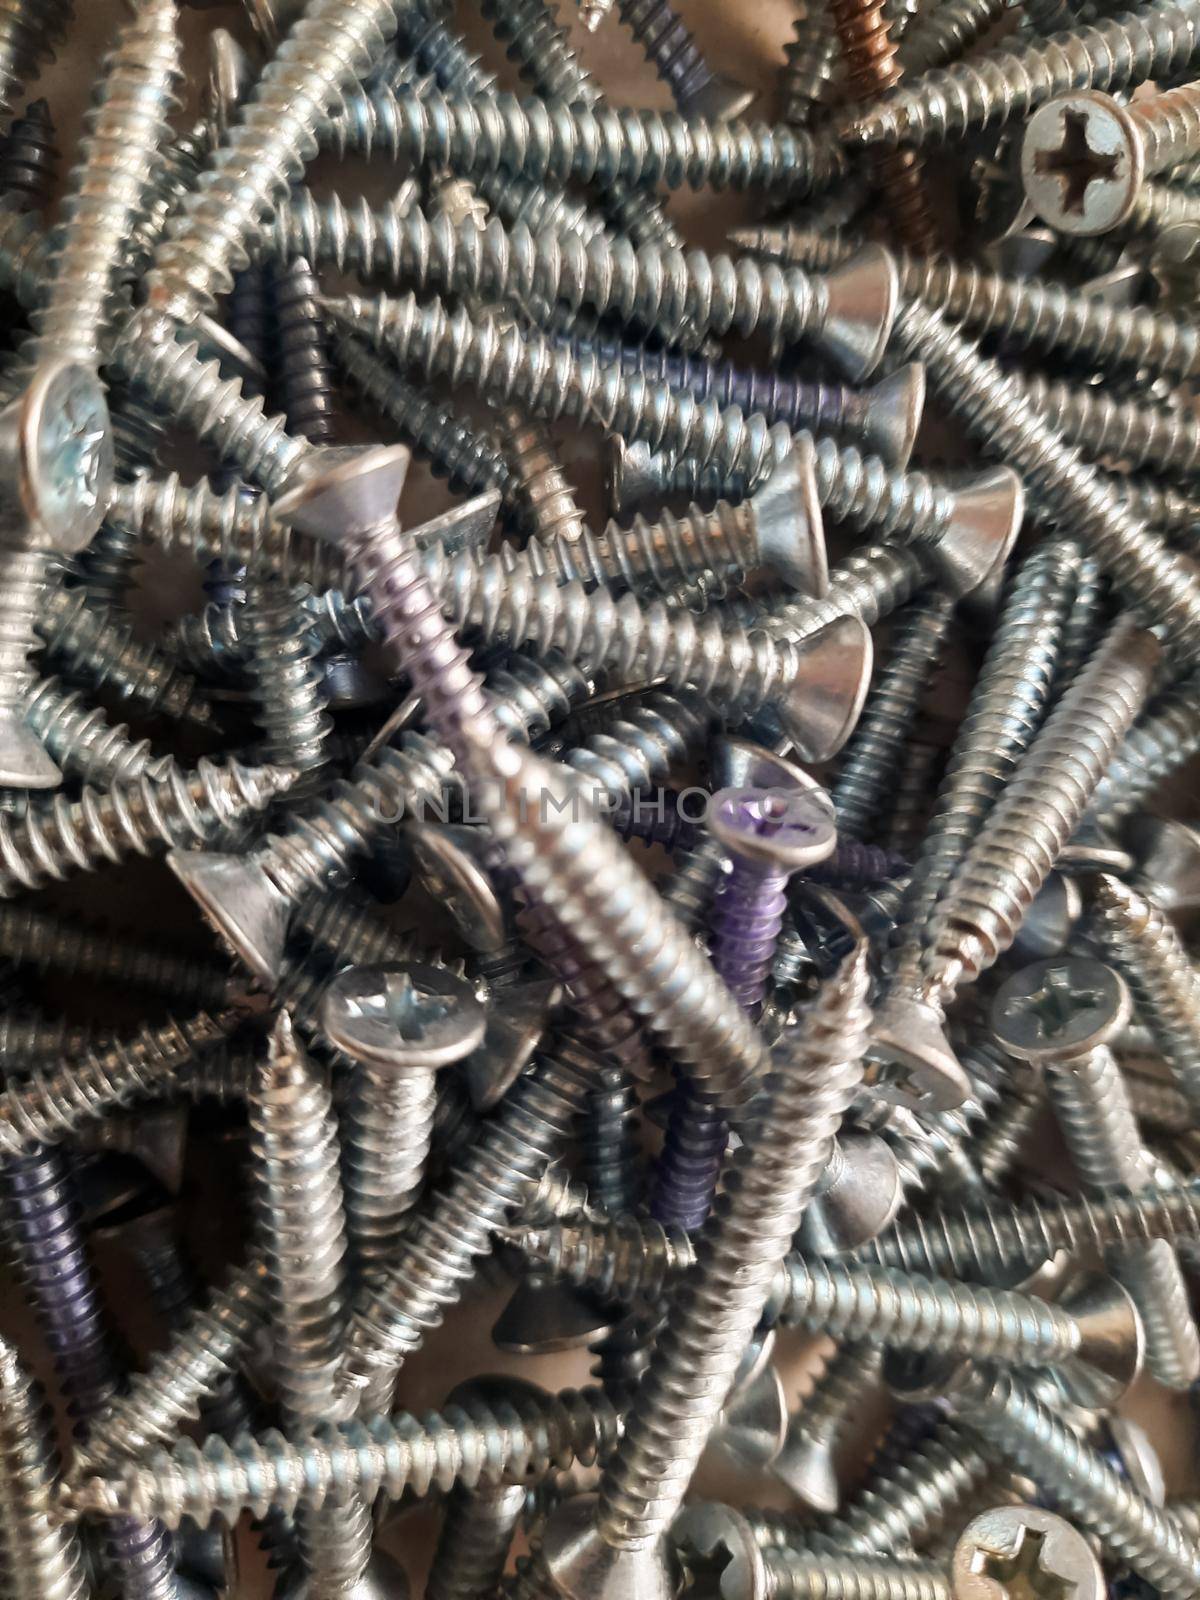 Bolts for screwing used in carpentry and handicrafts for industrial and household. by tabishere